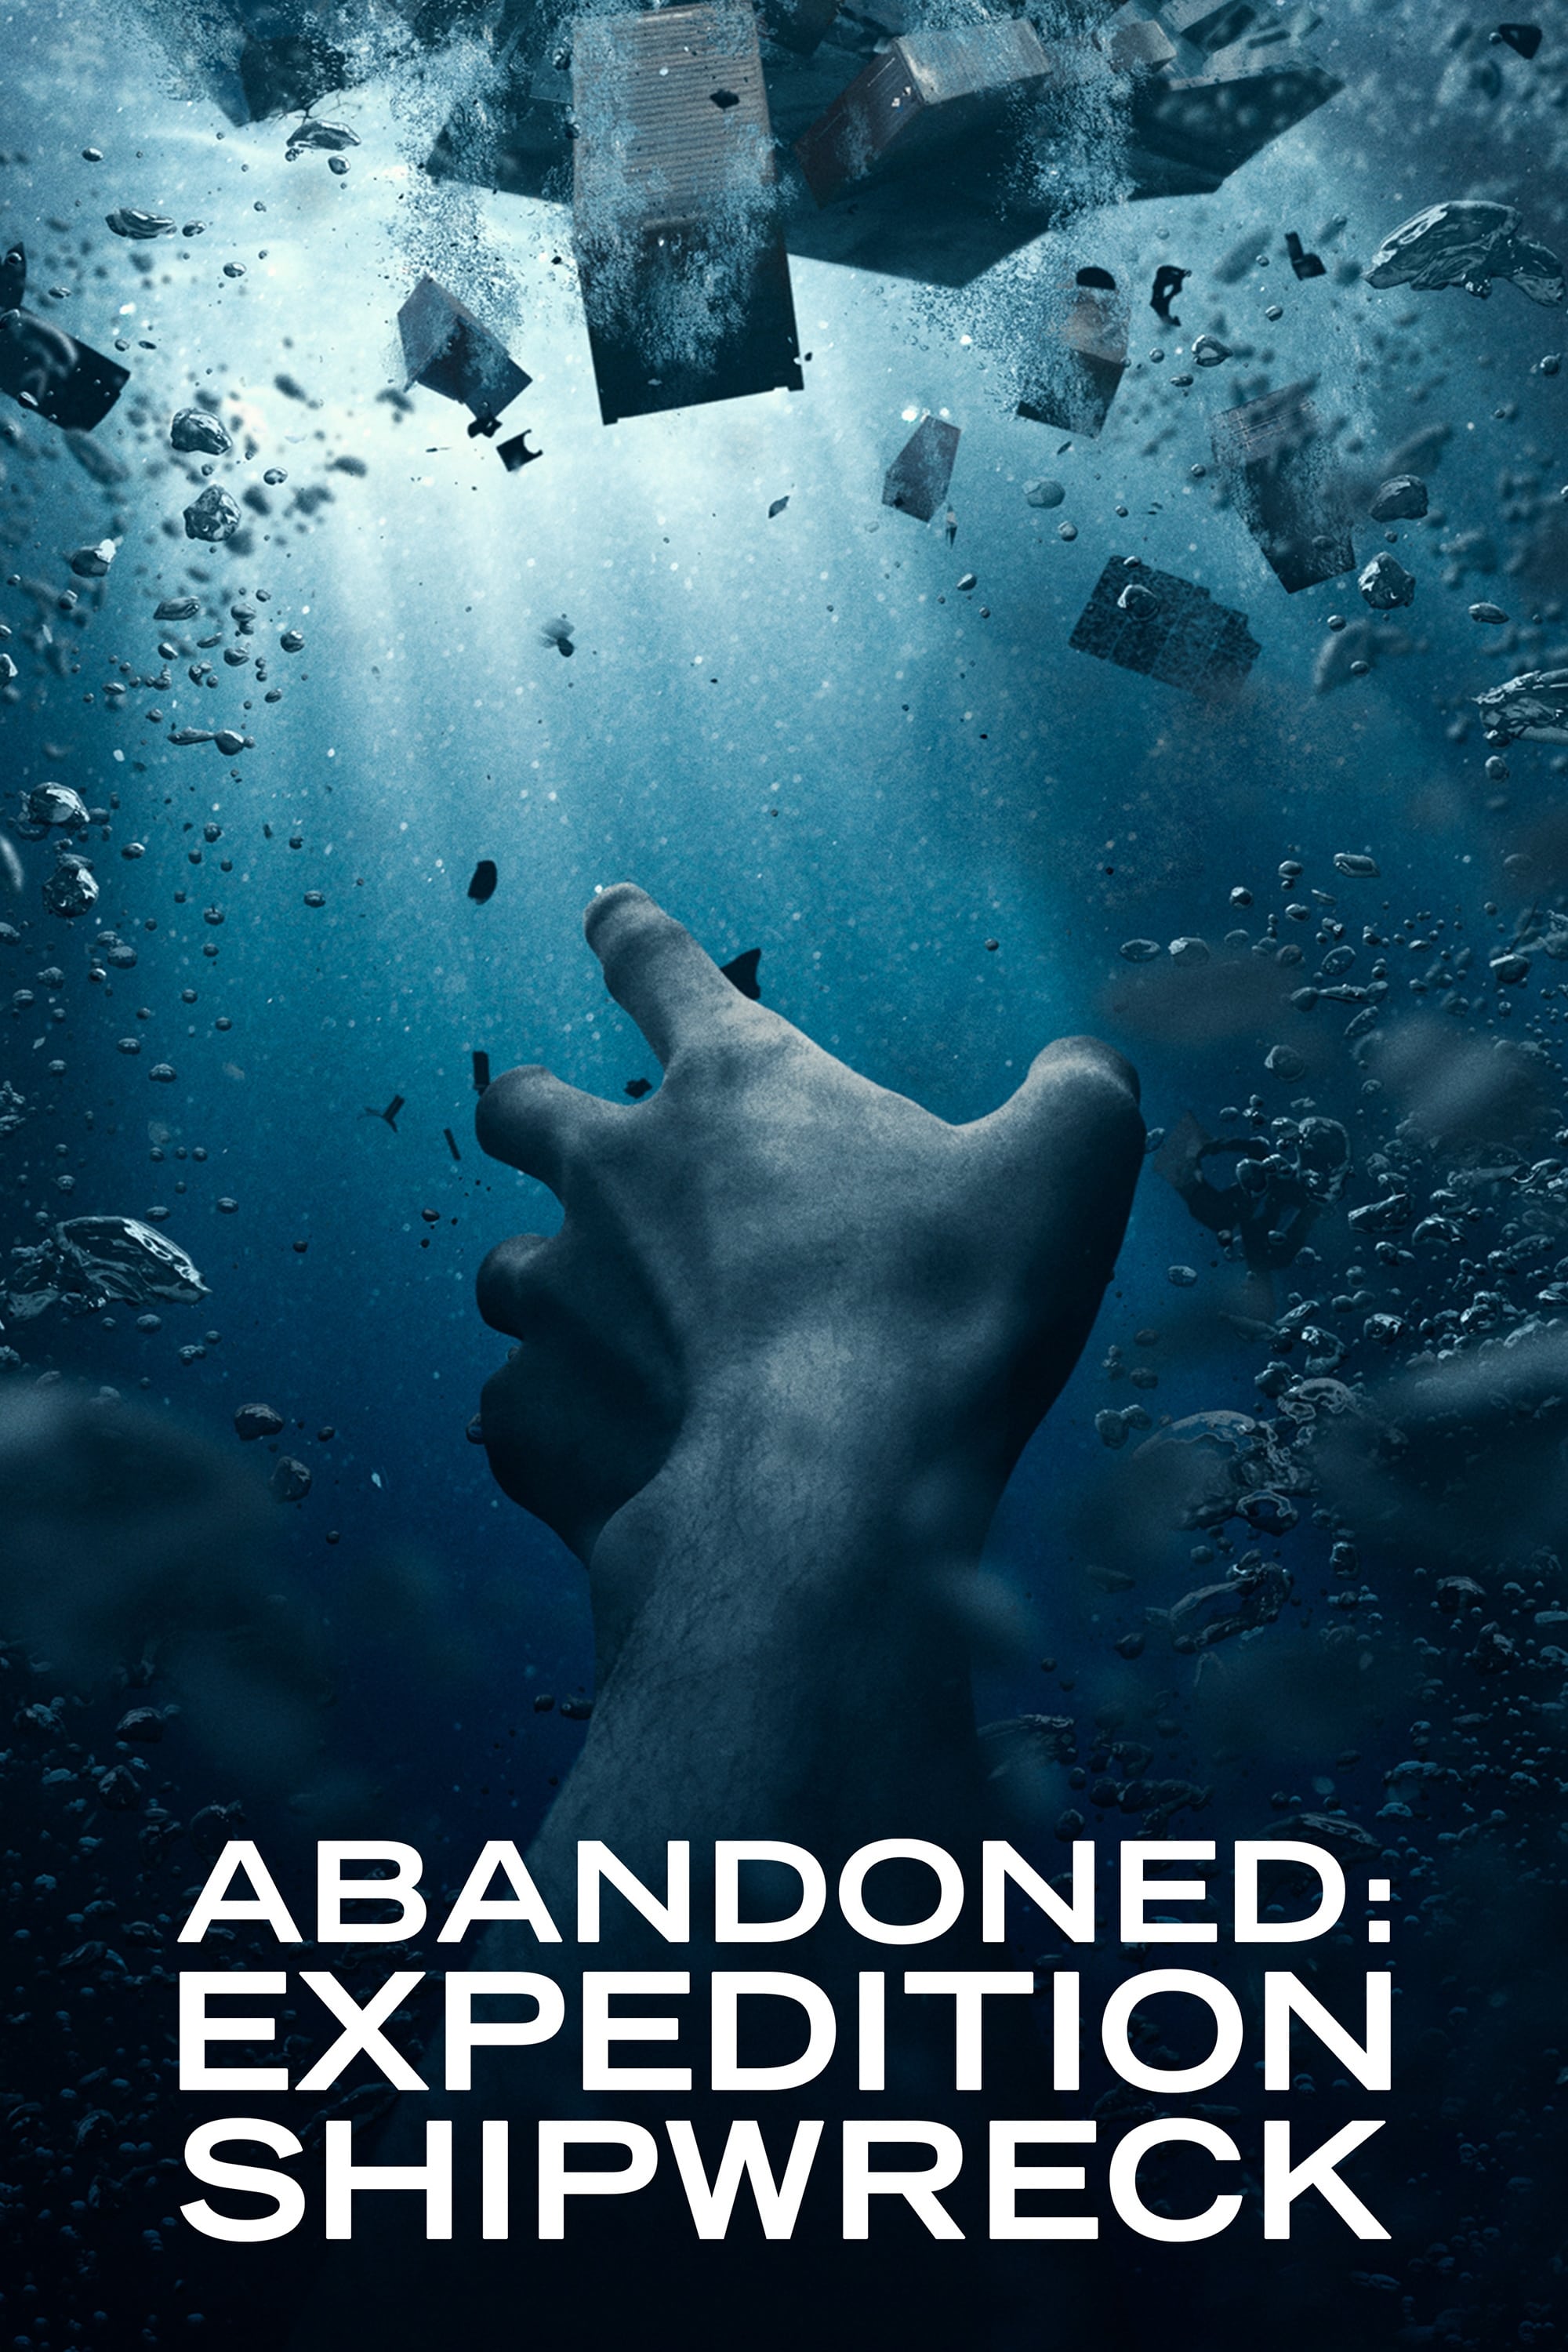 Abandoned: Expedition Shipwreck TV Shows About Shipwreck